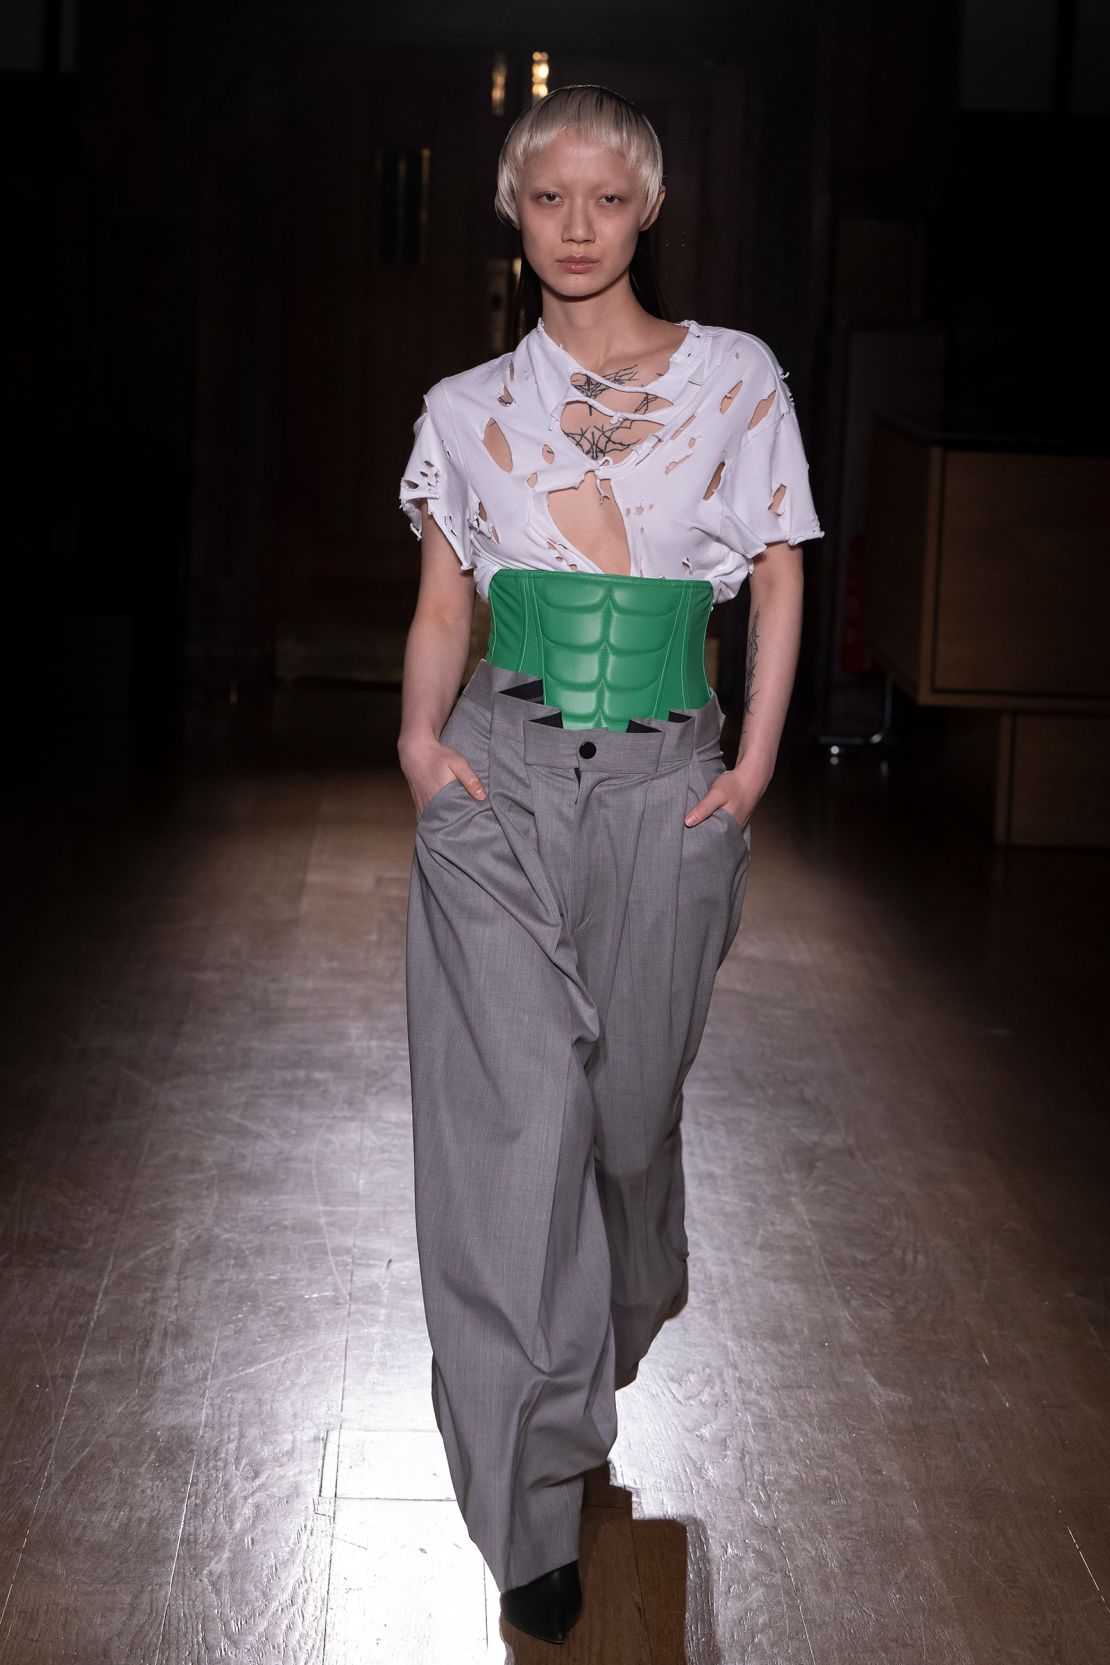 London Fashion Week highlights: Baby bumps, inflatable trousers and ...